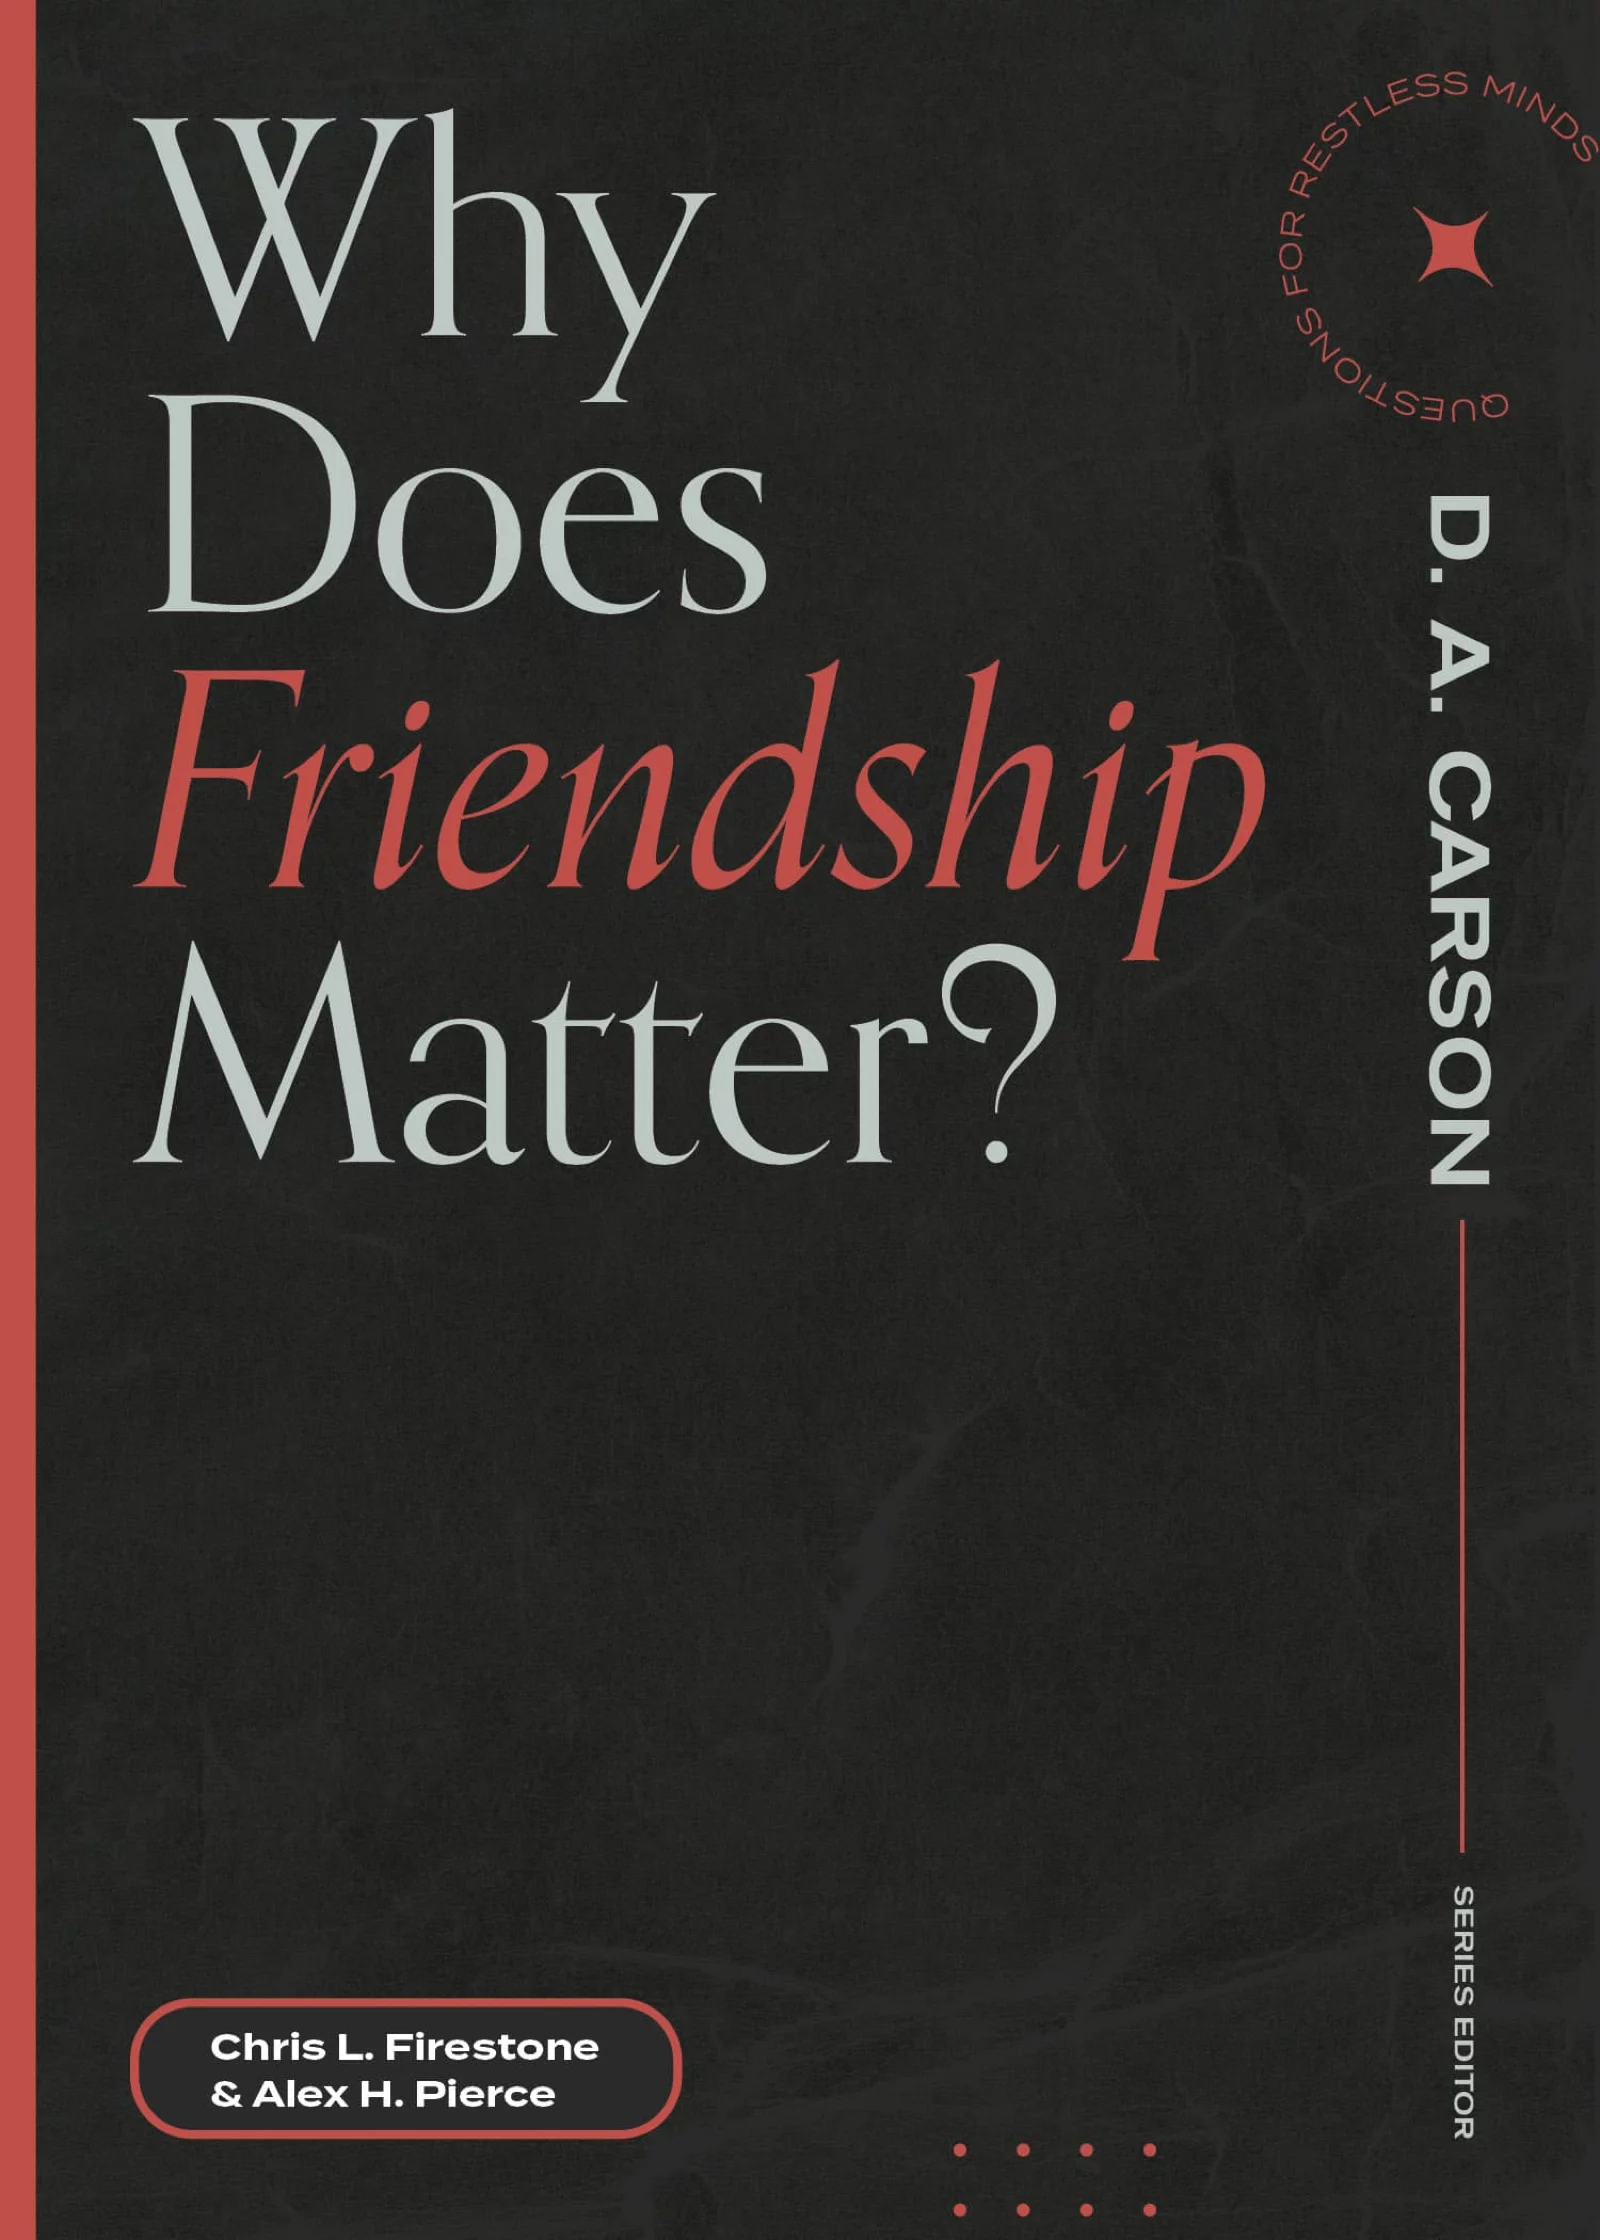  2022/08/Why-Does-Friendship-Matter.webp 